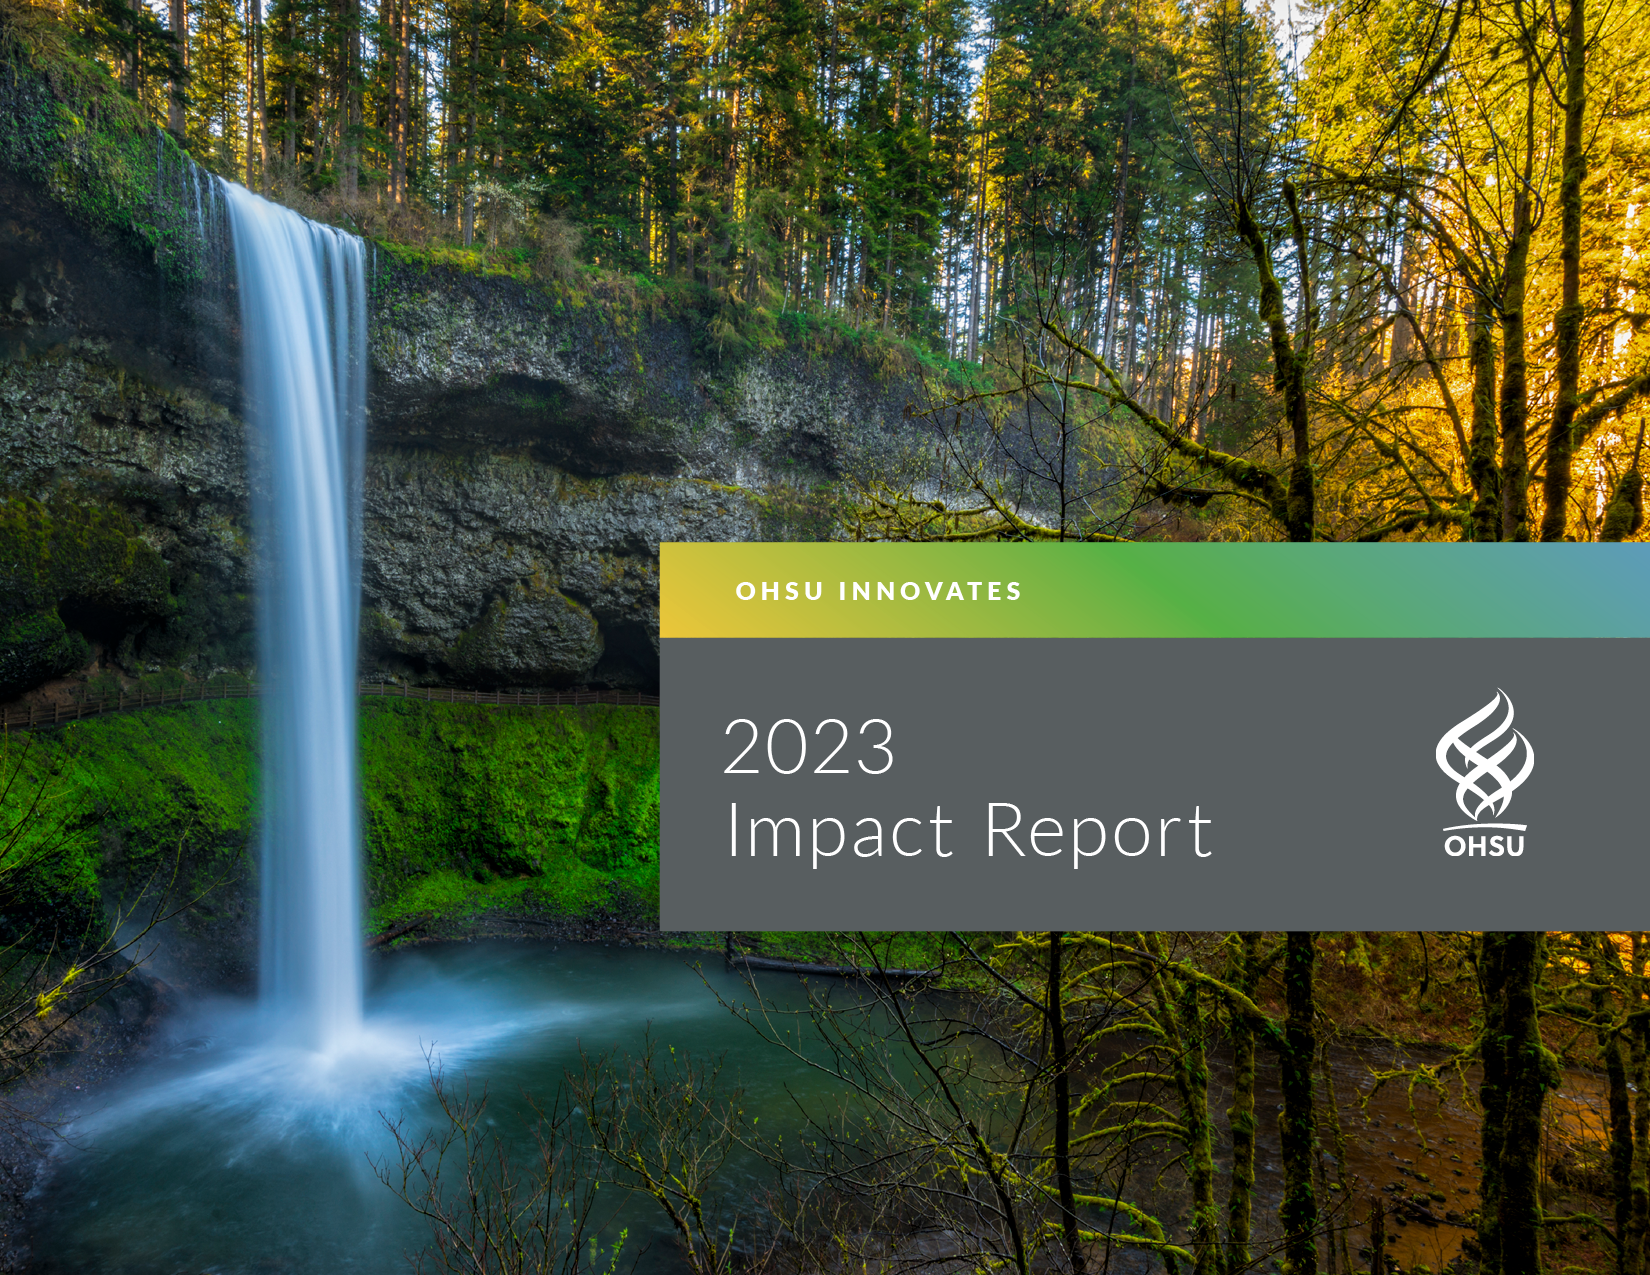 Cover page with waterfall and title OHSU Innovates 2023 Impact Report